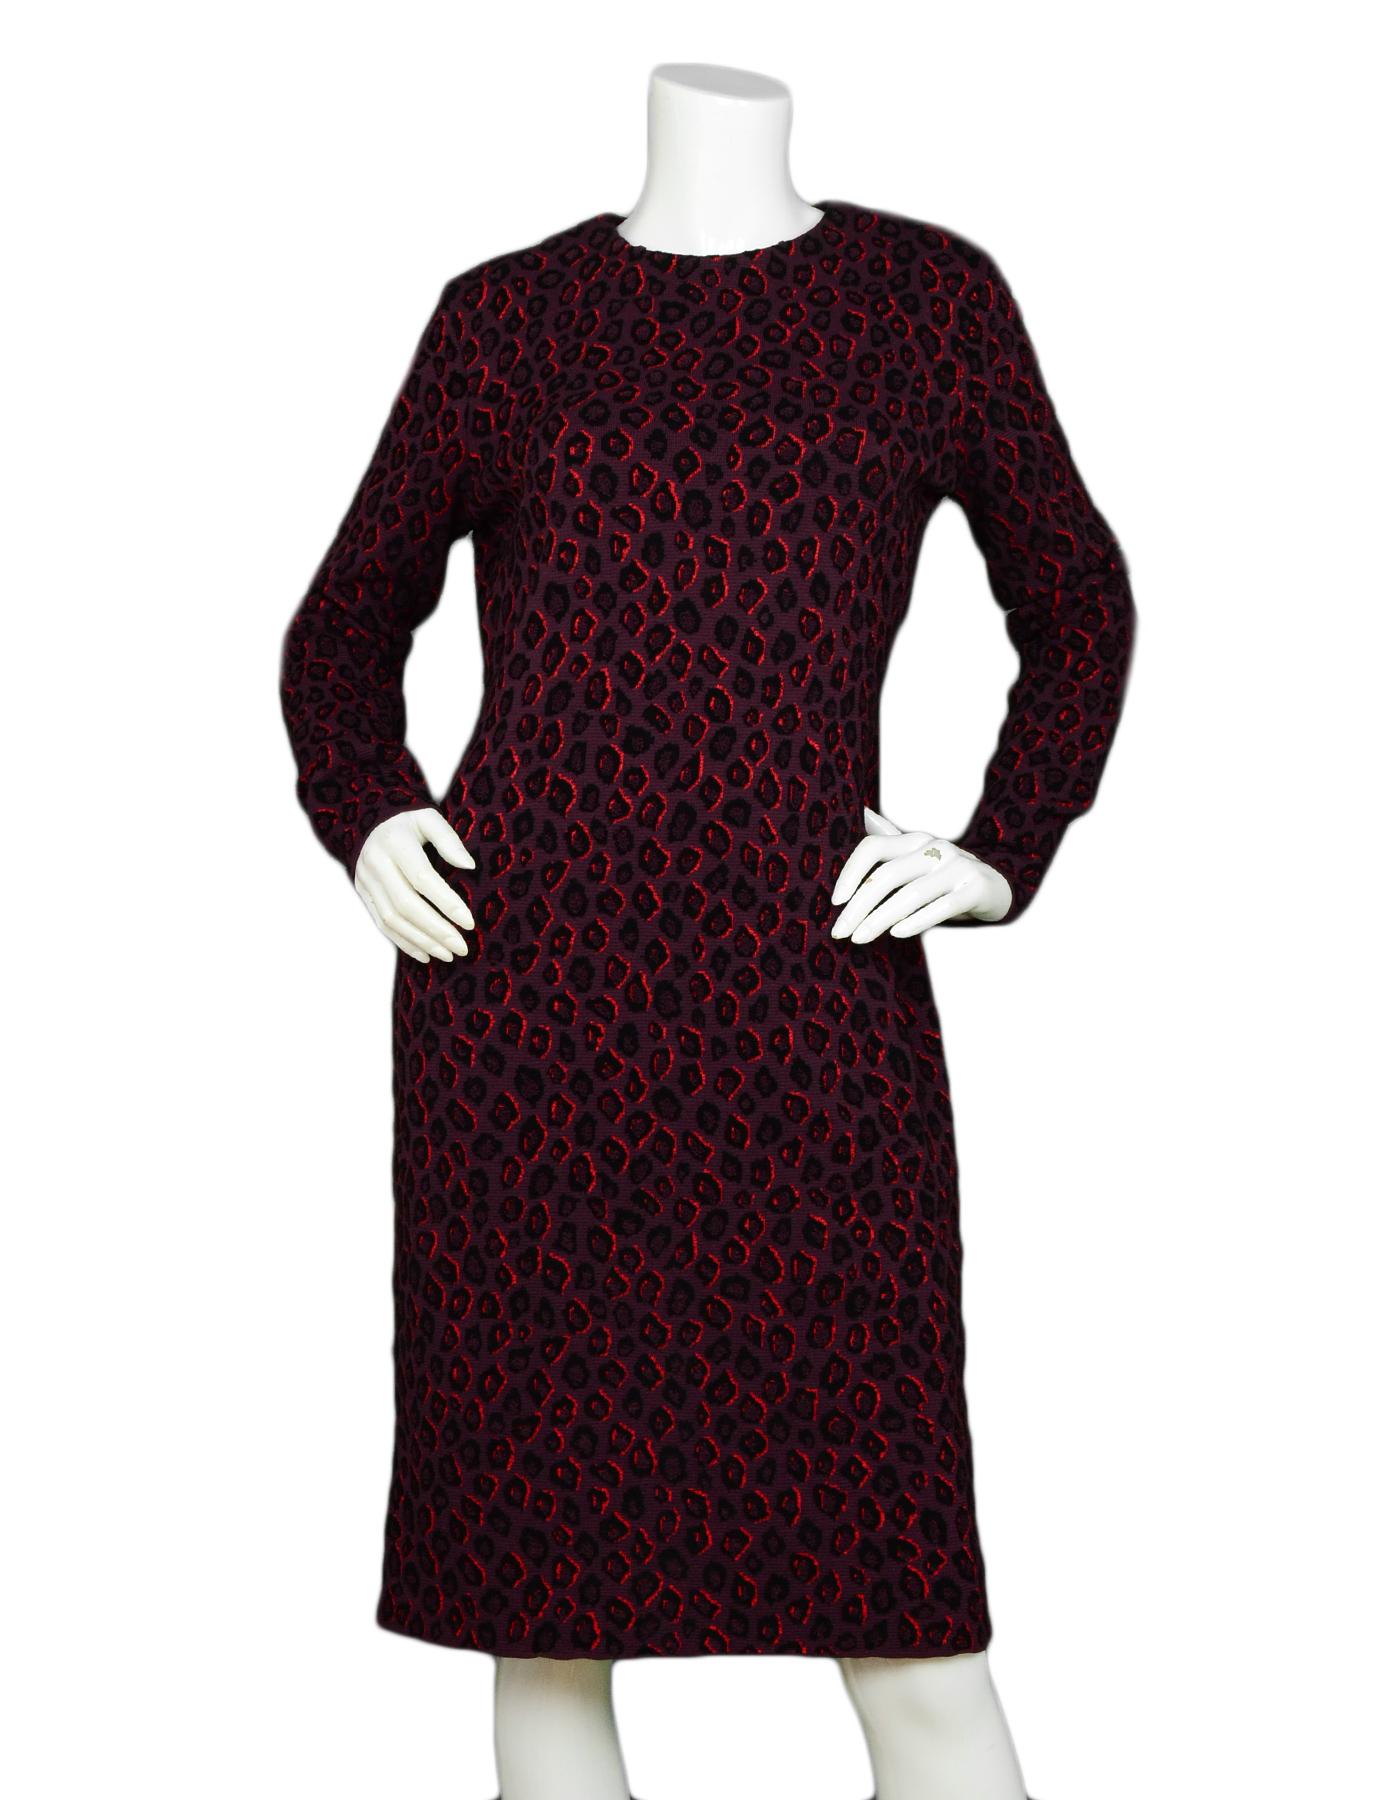 Givenchy 2019 Black Burgundy Leopard Print Longsleeve Dress NWT sz L

Made In: Italy
Year of Production: 2019 
Color: Burgundy, black
Materials: Viscose, cotton
Lining: Viscose, cotton
Opening/Closure: Back zipper
Overall Condition: NWT (New with